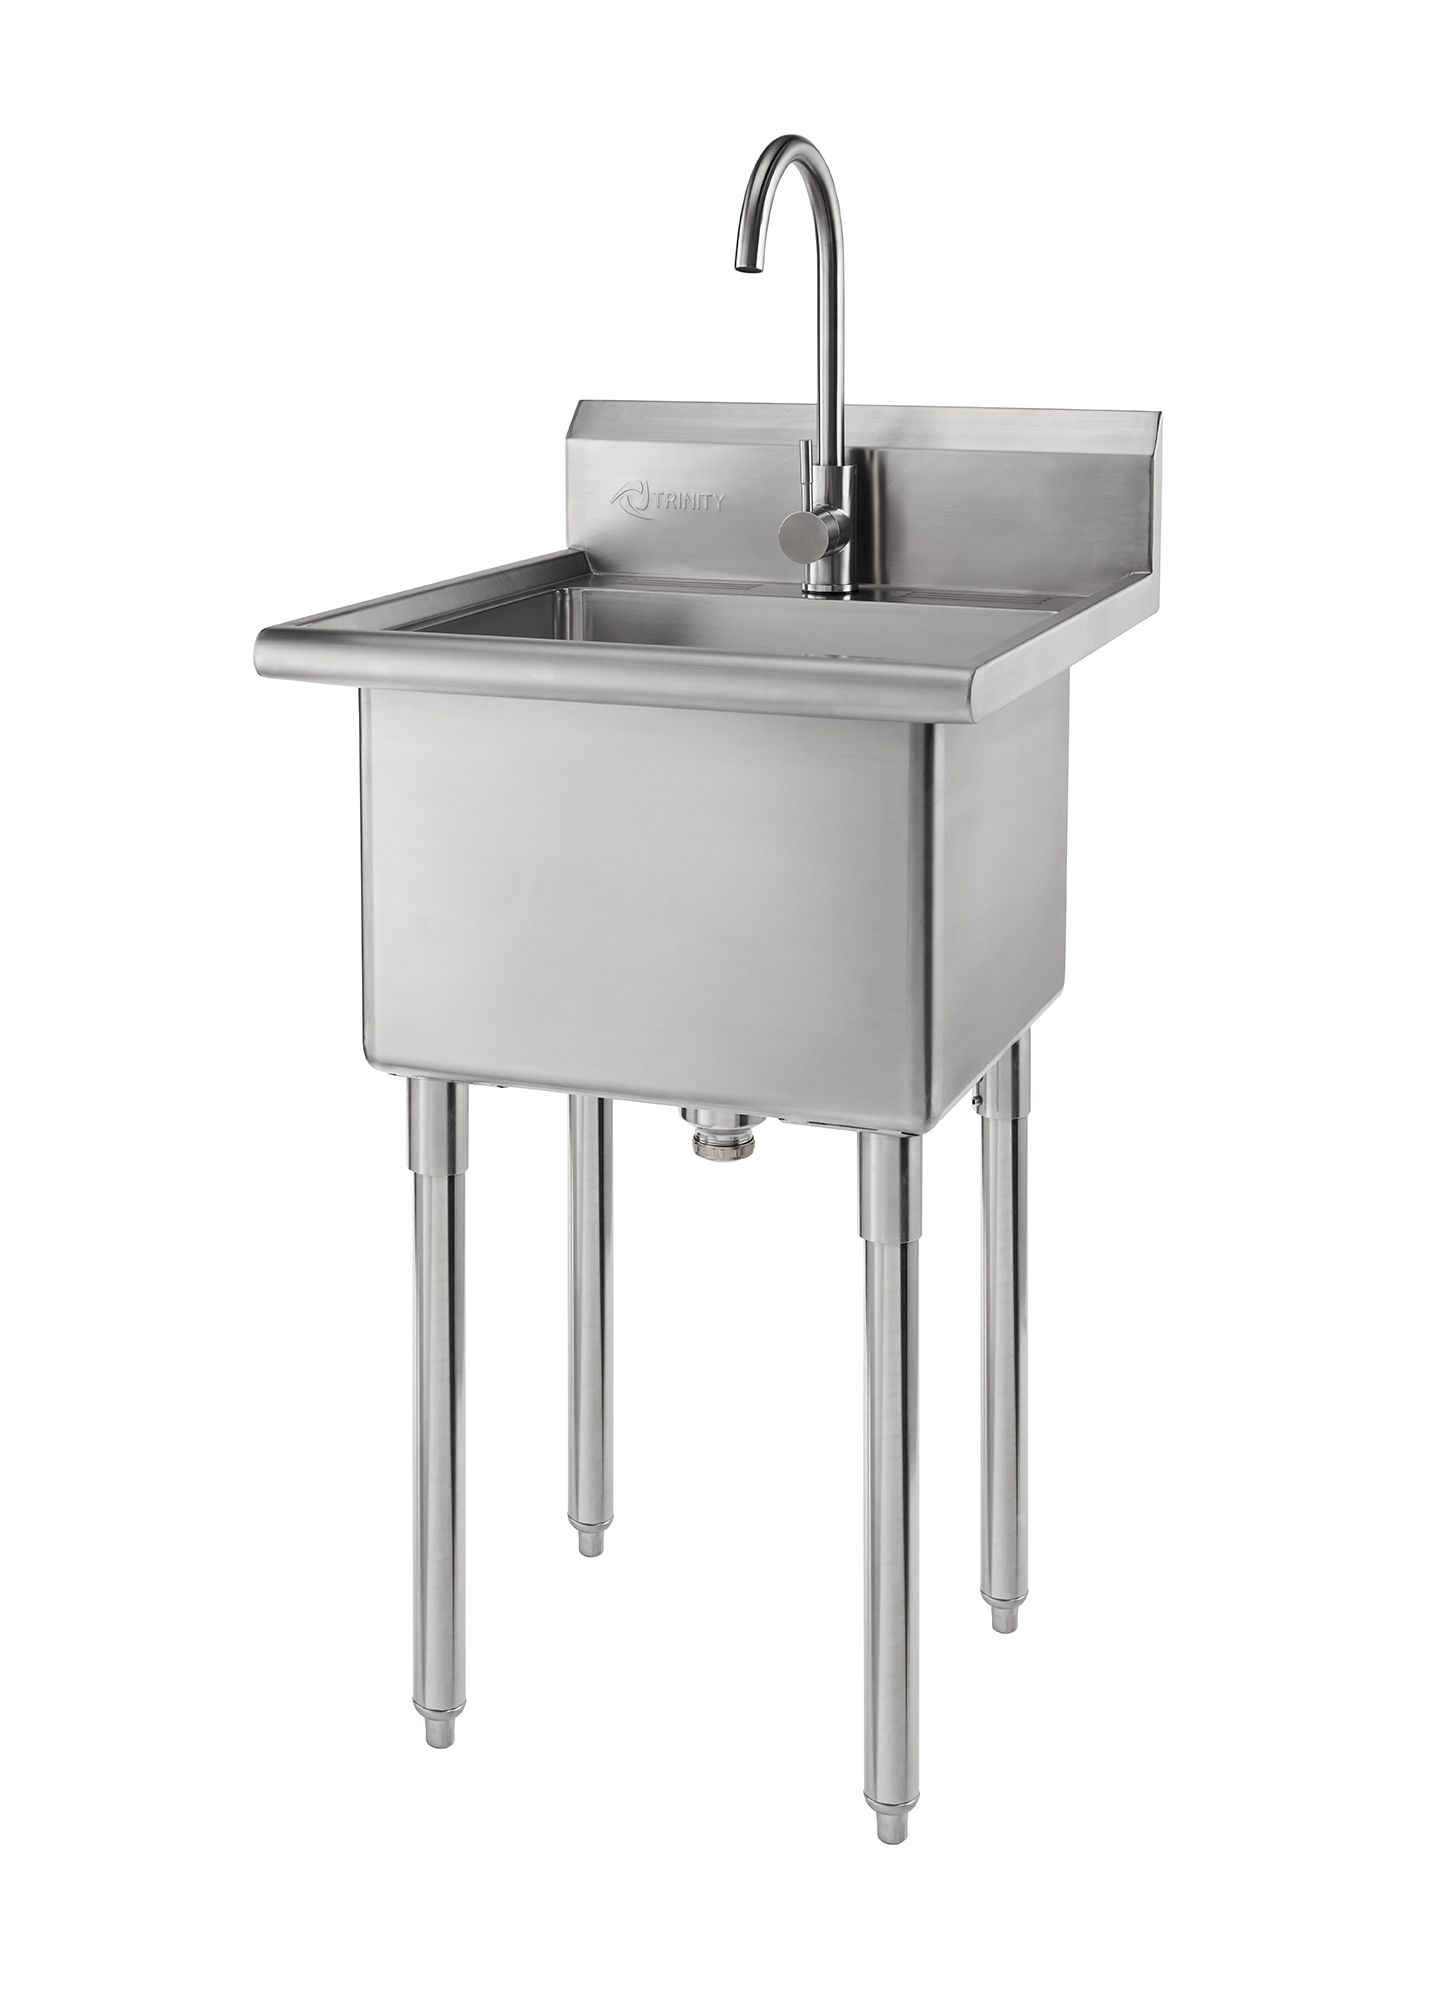 Trinity Stainless Steel Utility Sink With Faucet